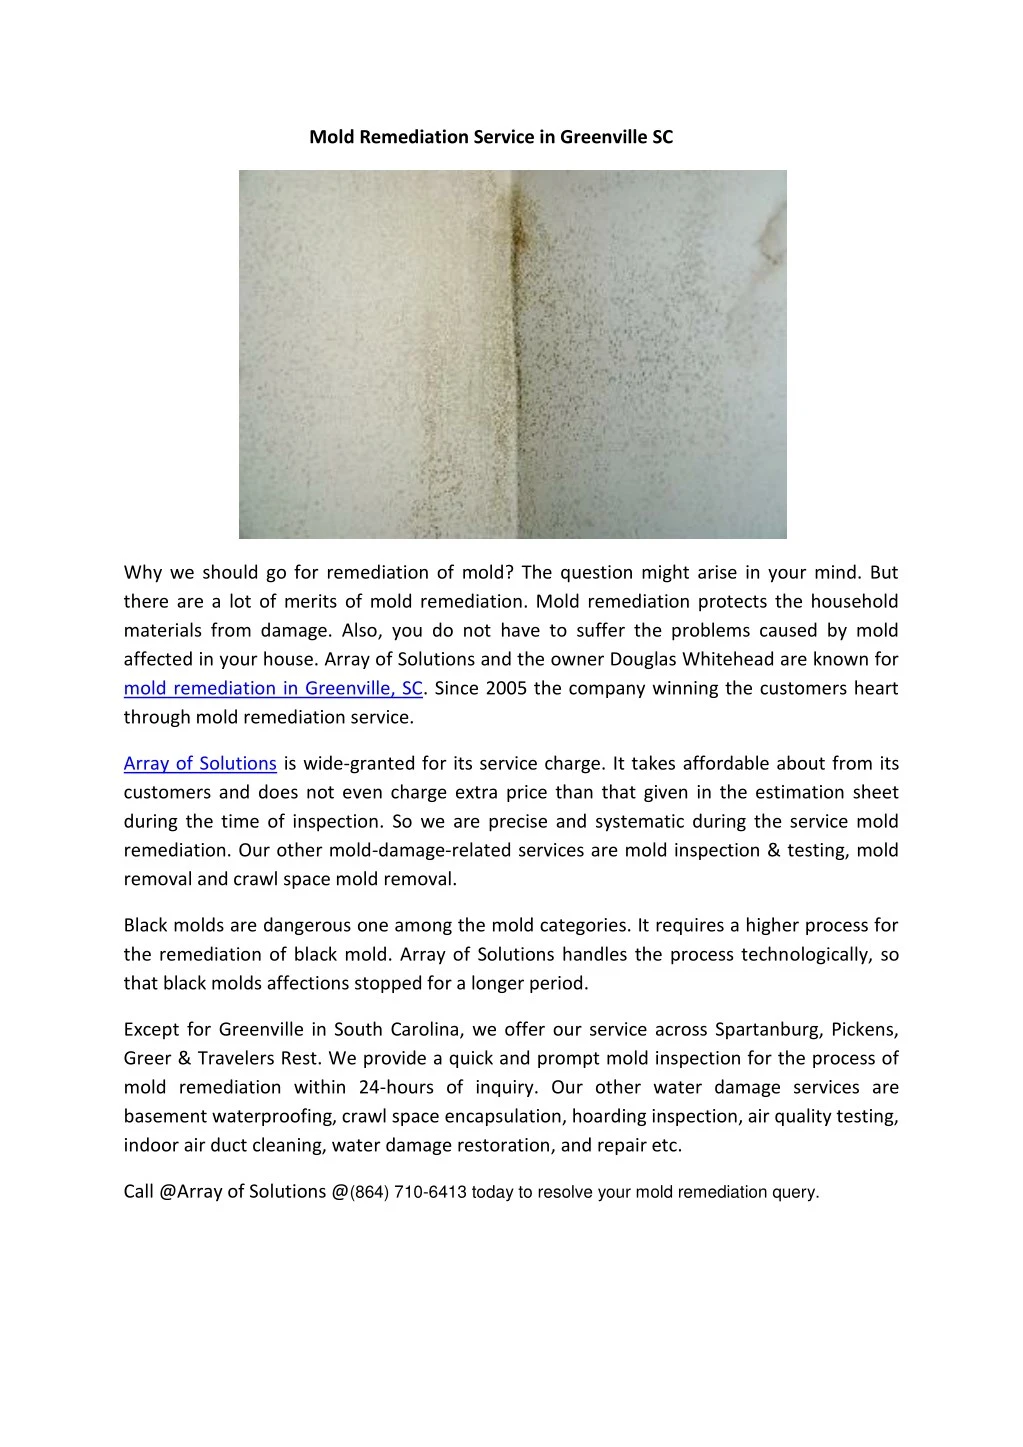 mold remediation service in greenville sc